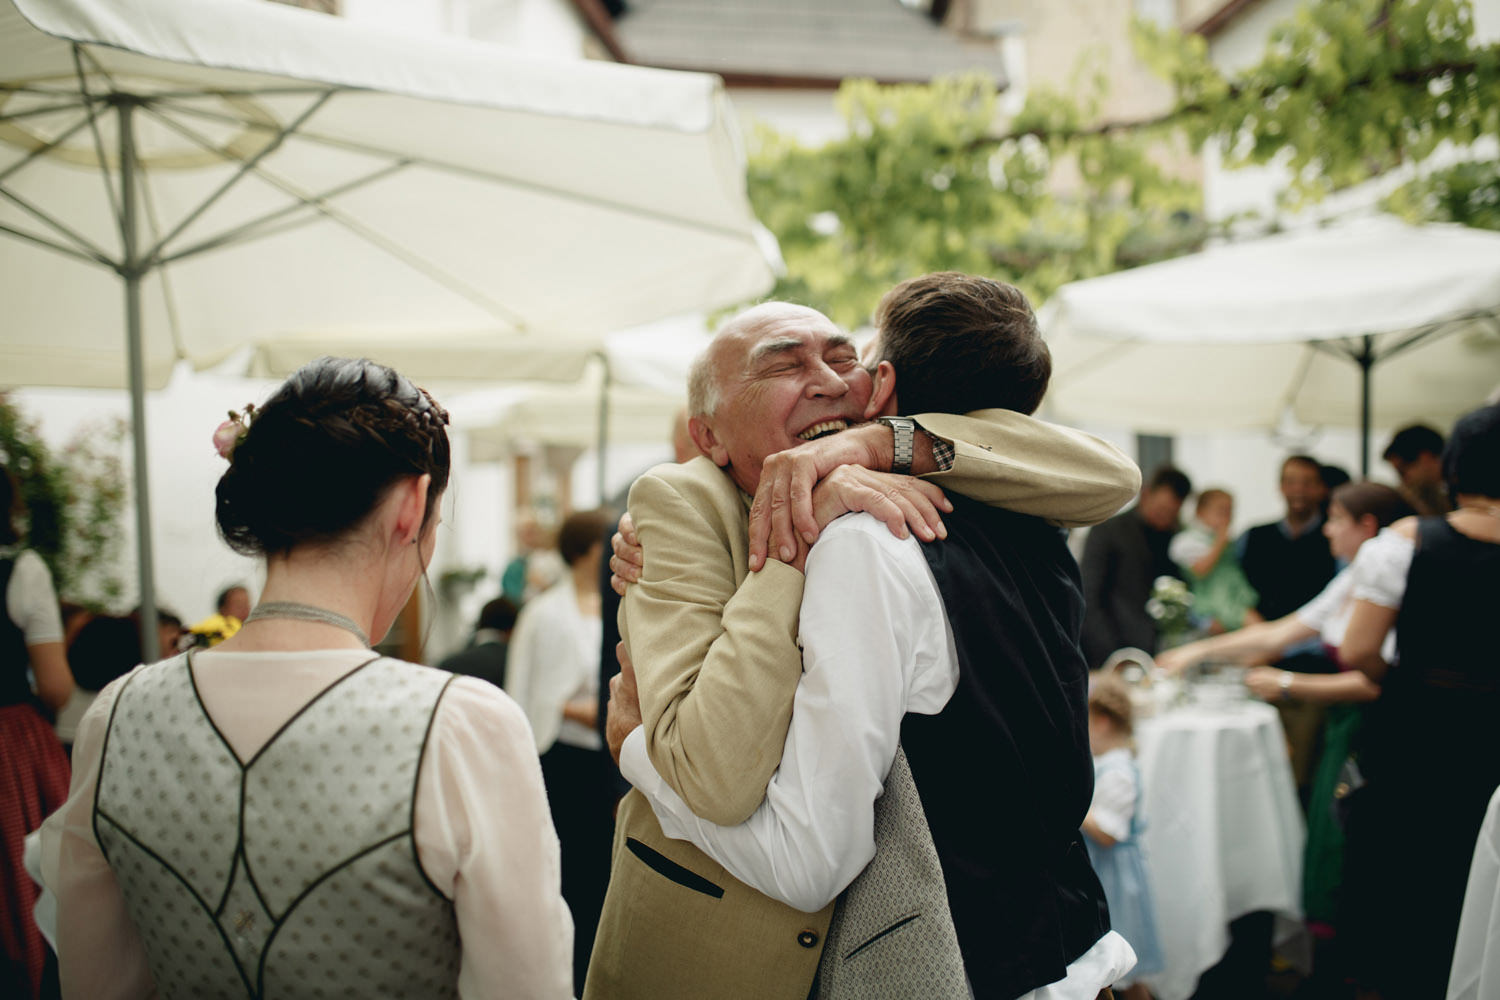 greeting the groom after perchtoldsdorf wedding